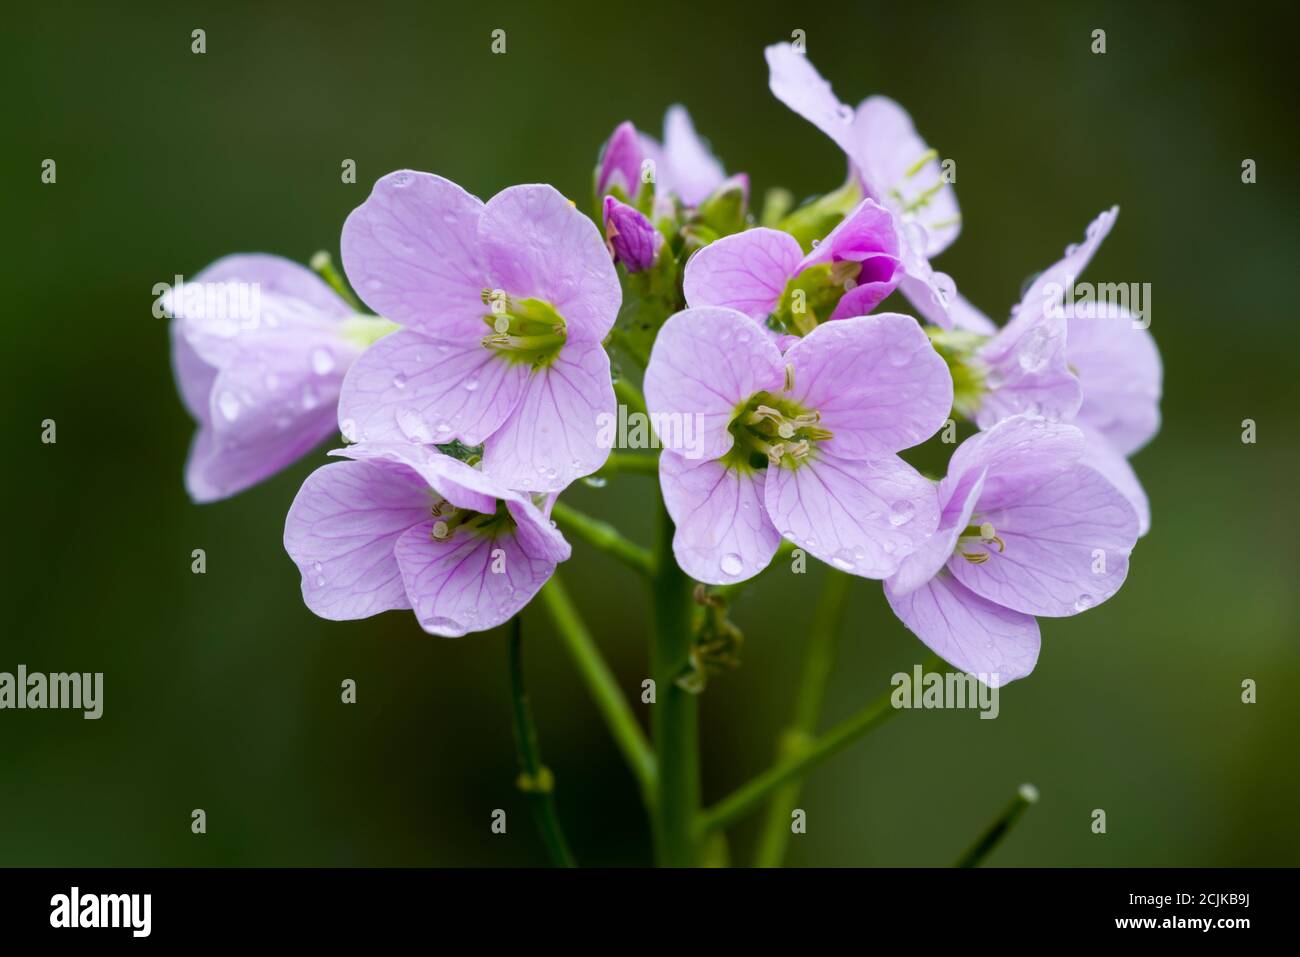 Cuckoo Flower (Cardamine pratensis) flowers in a British woodland. Also known as Lady's Smock, Mayflower and Milkmaids. Stock Photo